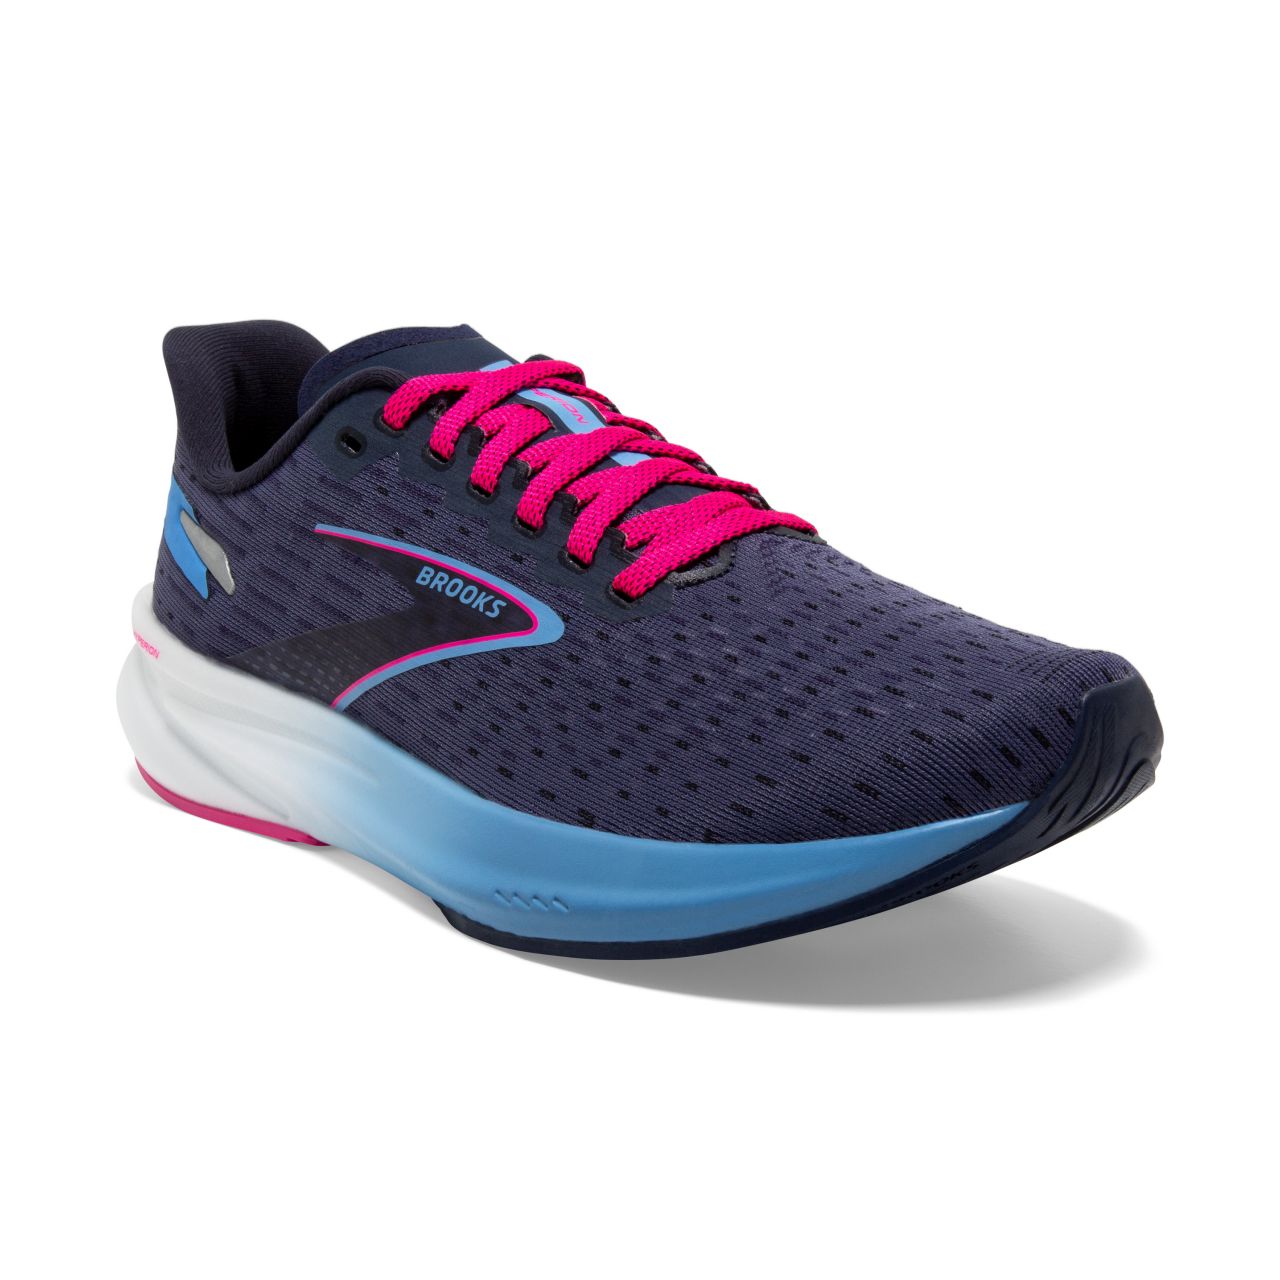 BROOKS HYPERION TEMPO PEACOT ET LILA ROSE Chaussures de running